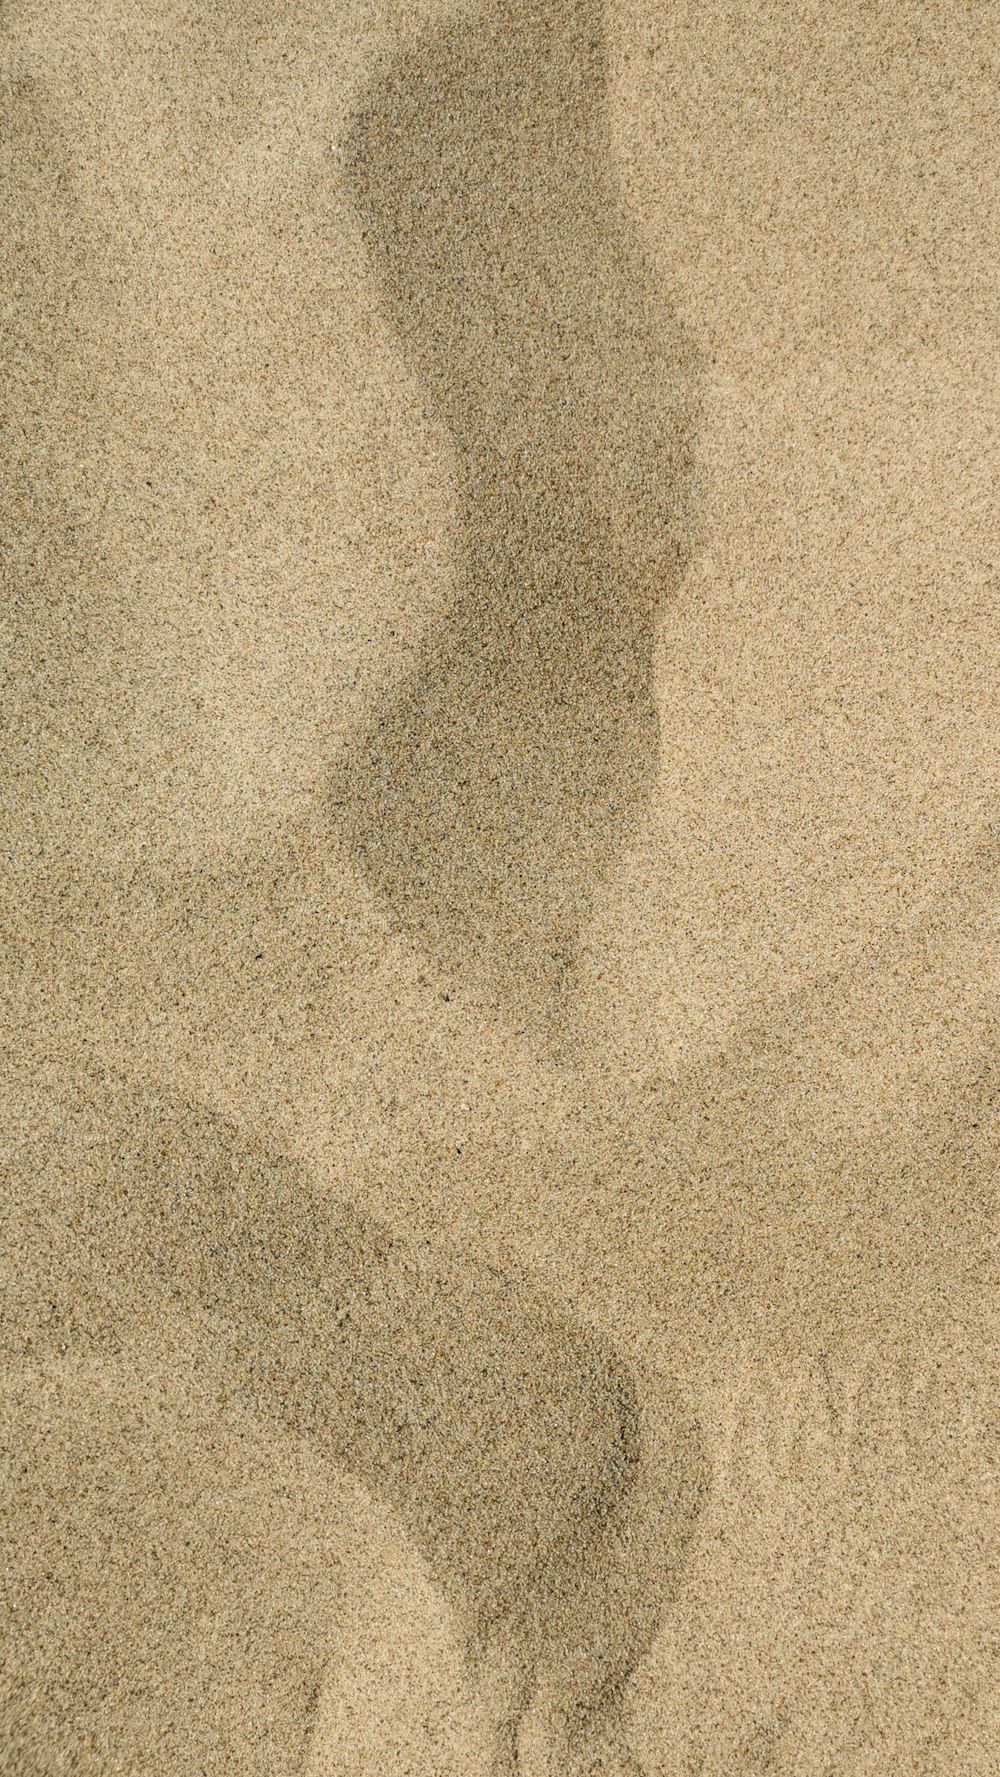 a shadow of a person standing in the sand